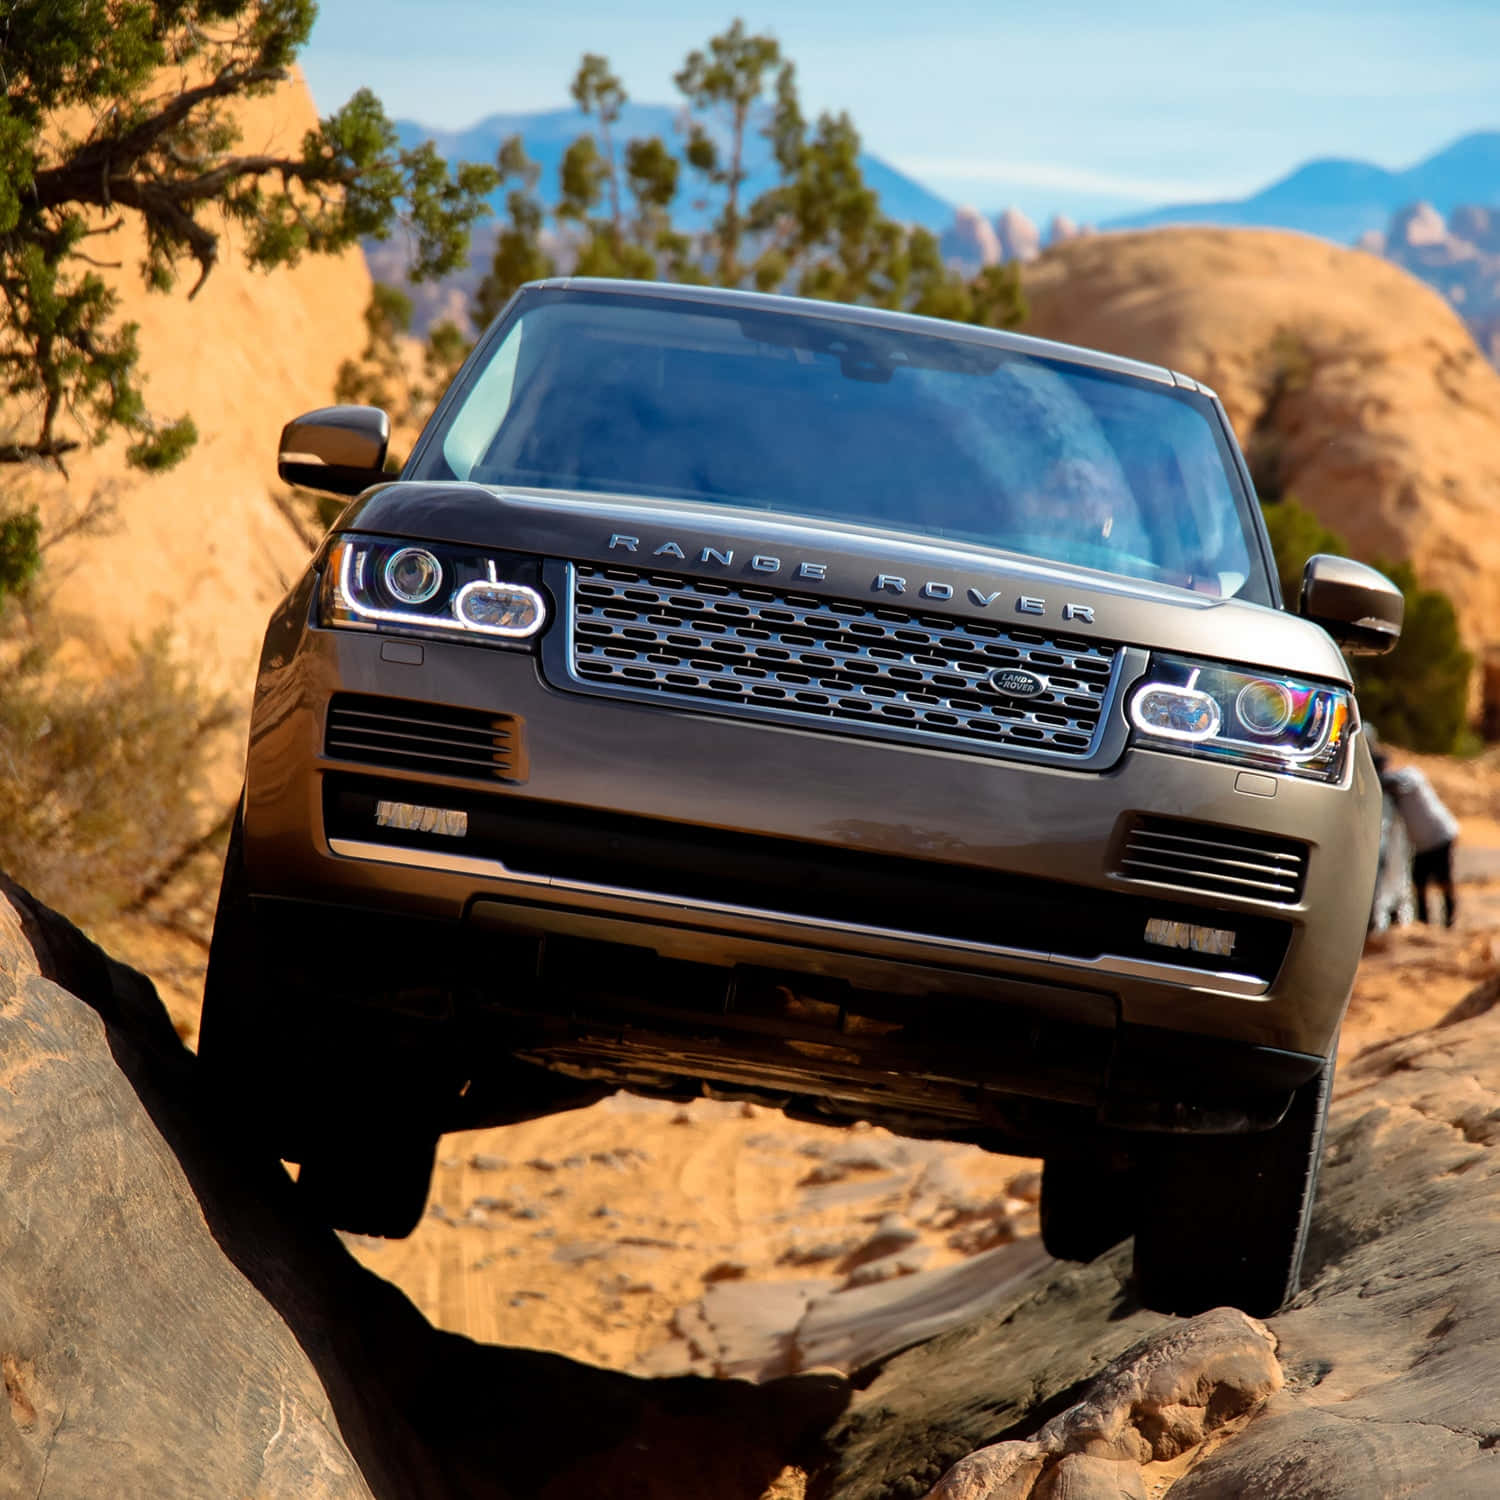 Feel the Power of the Range Rover